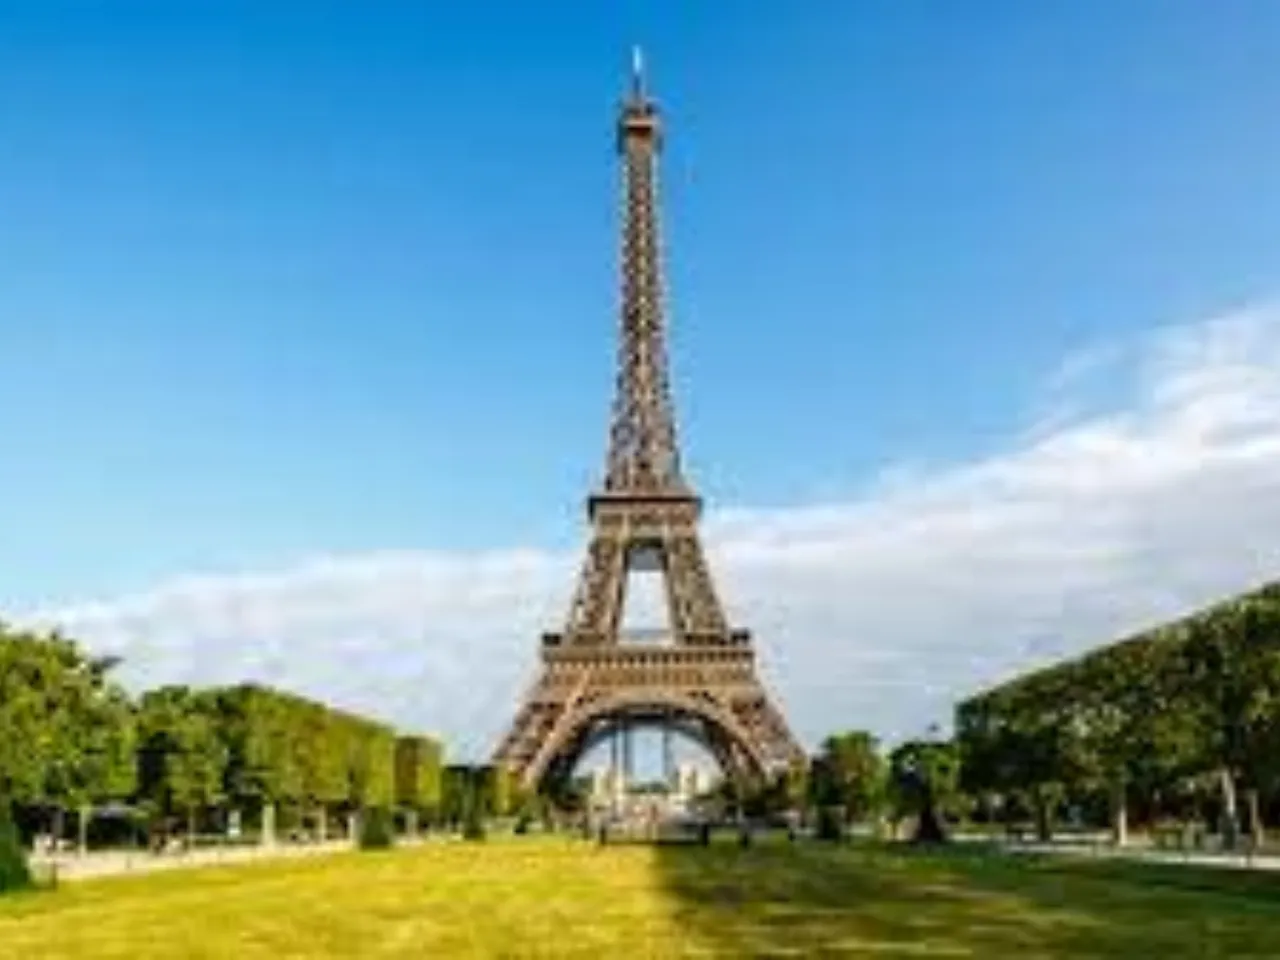 Foreign tourists were attacked by criminals in front of the Eiffel Tower